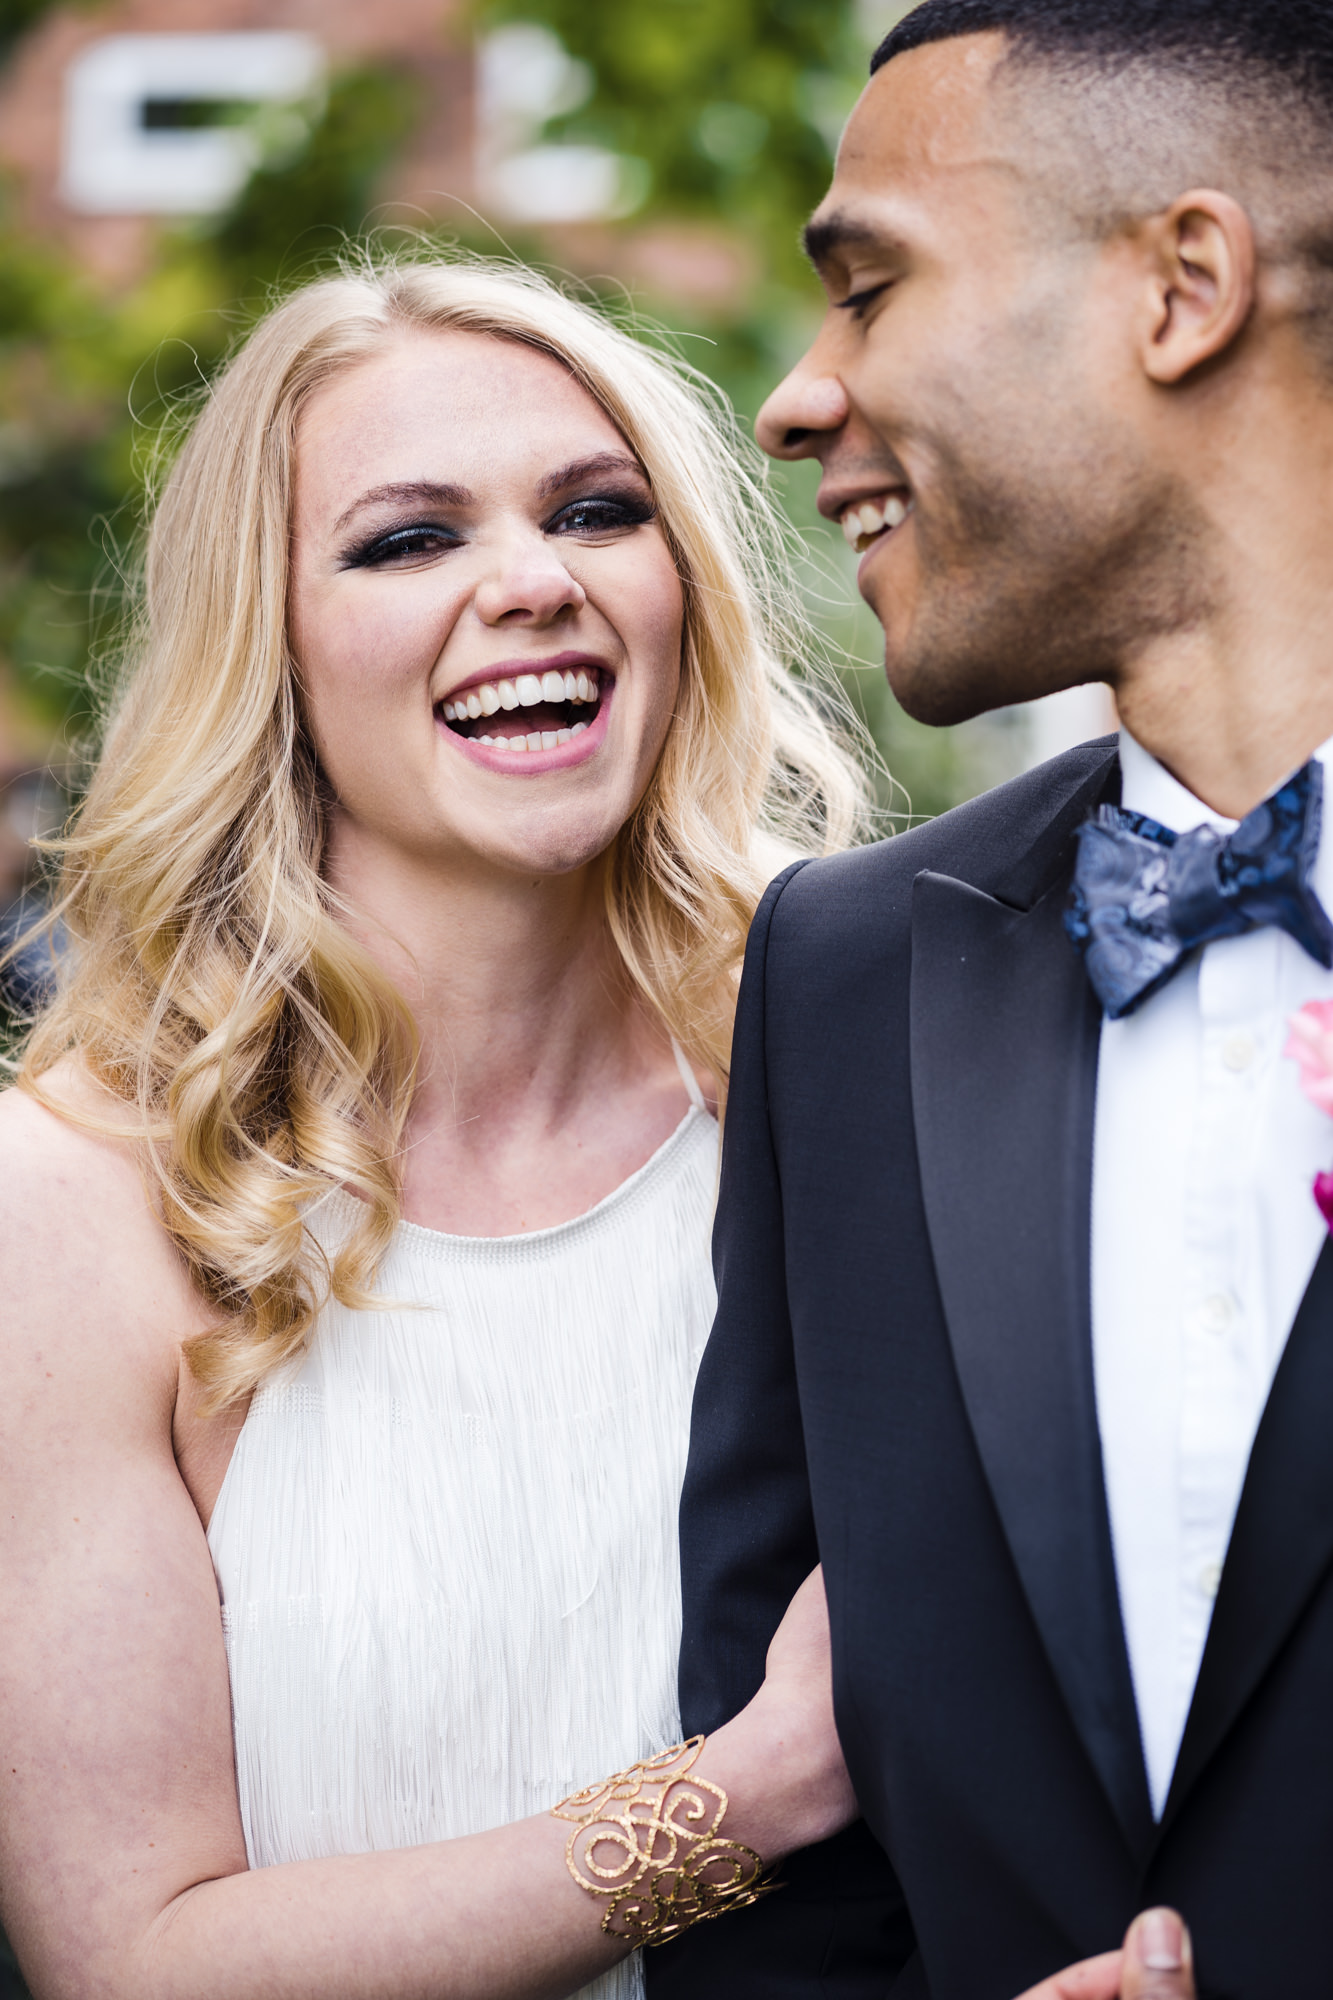 bride beams with laughter at the camera while groom looks back at her